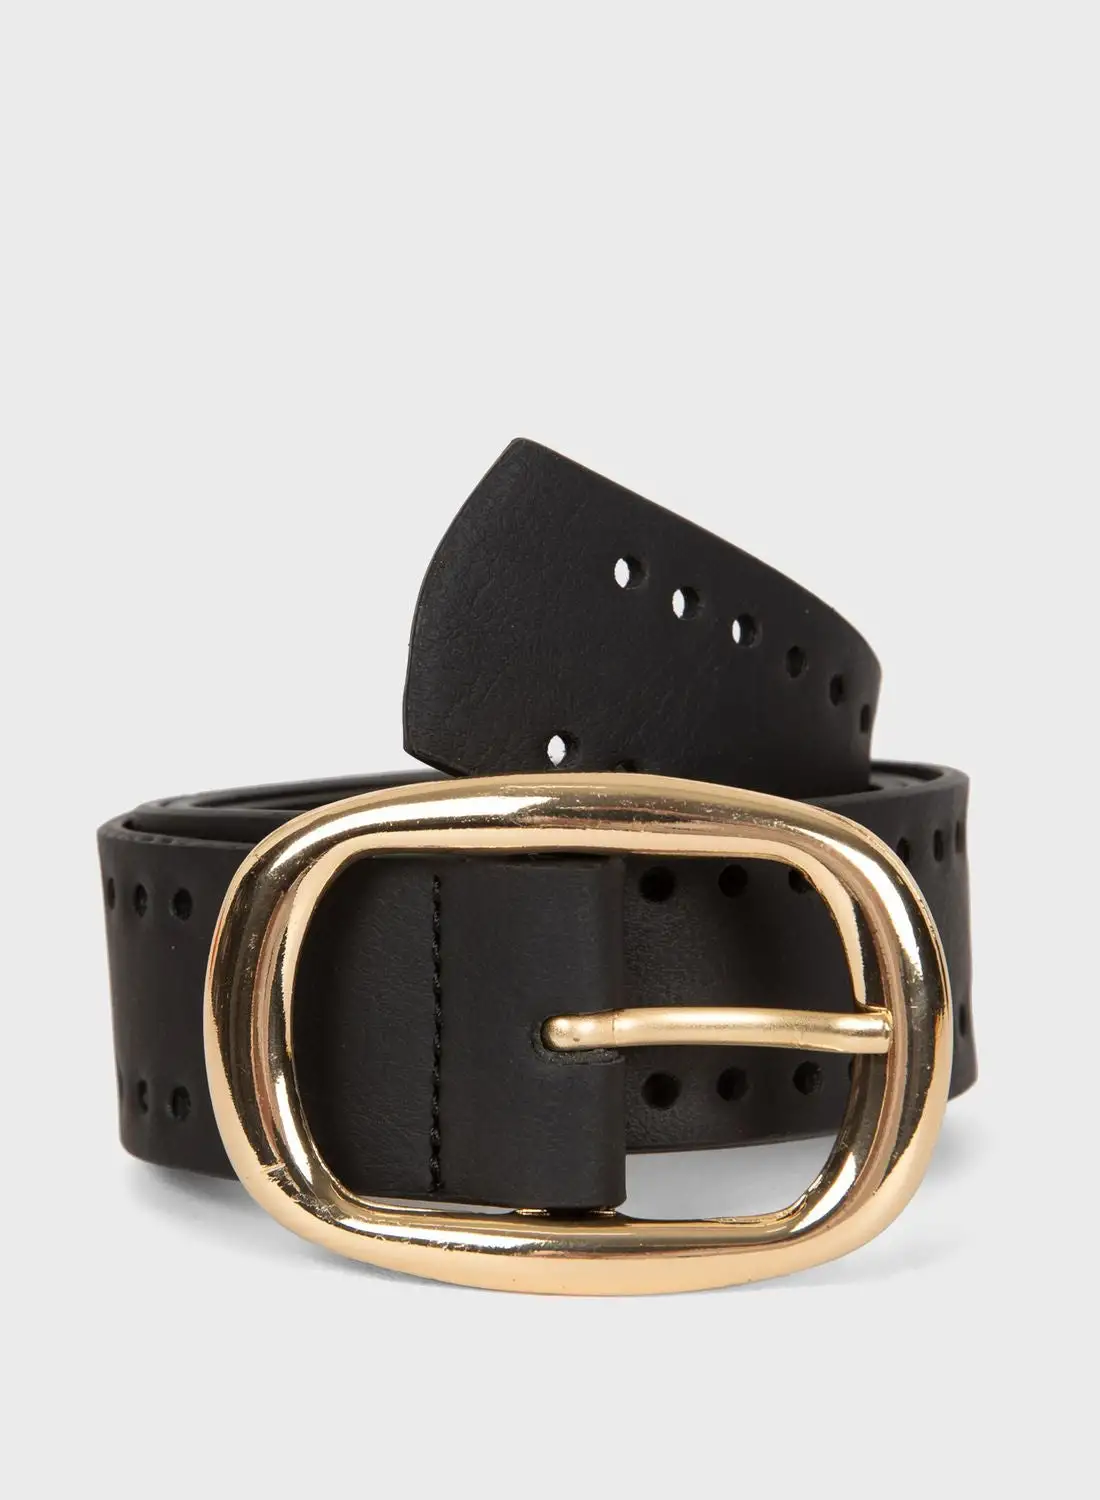 DeFacto Buckle Allocated Hole Belt